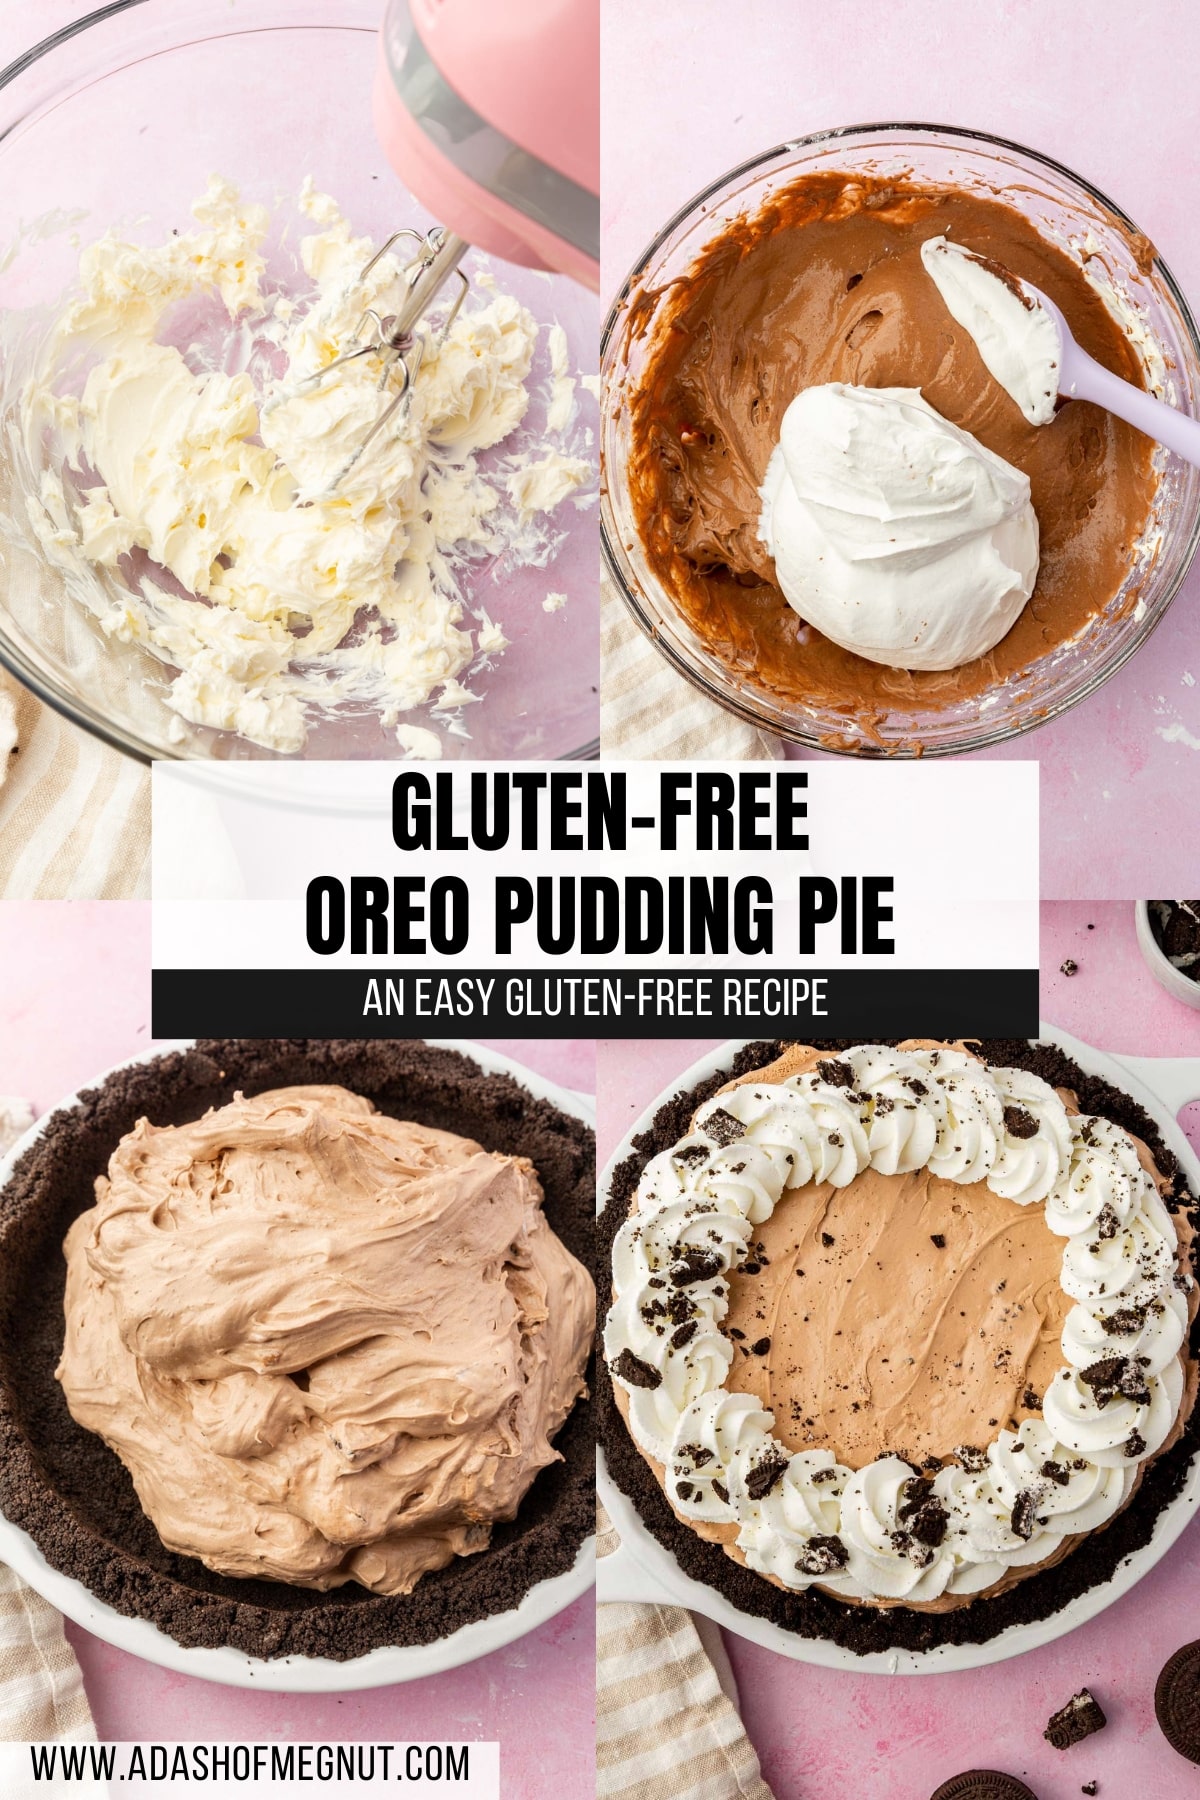 A four photo collage showing the process of making a gluten free Oreo pudding pie. Photo 1: Cream cheese being mixed by a pink hand mixer in a glass mixing bowl. Photo 2: A glass mixing bowl of a chocolate pudding mixture topped with Cool Whip before mixing together. Photo 3: A chocolate pudding mixture in an Oreo pie crust. Photo 4: A gluten-free Oreo pudding pie topped with whipped cream swirls and crushed gluten-free Oreos.